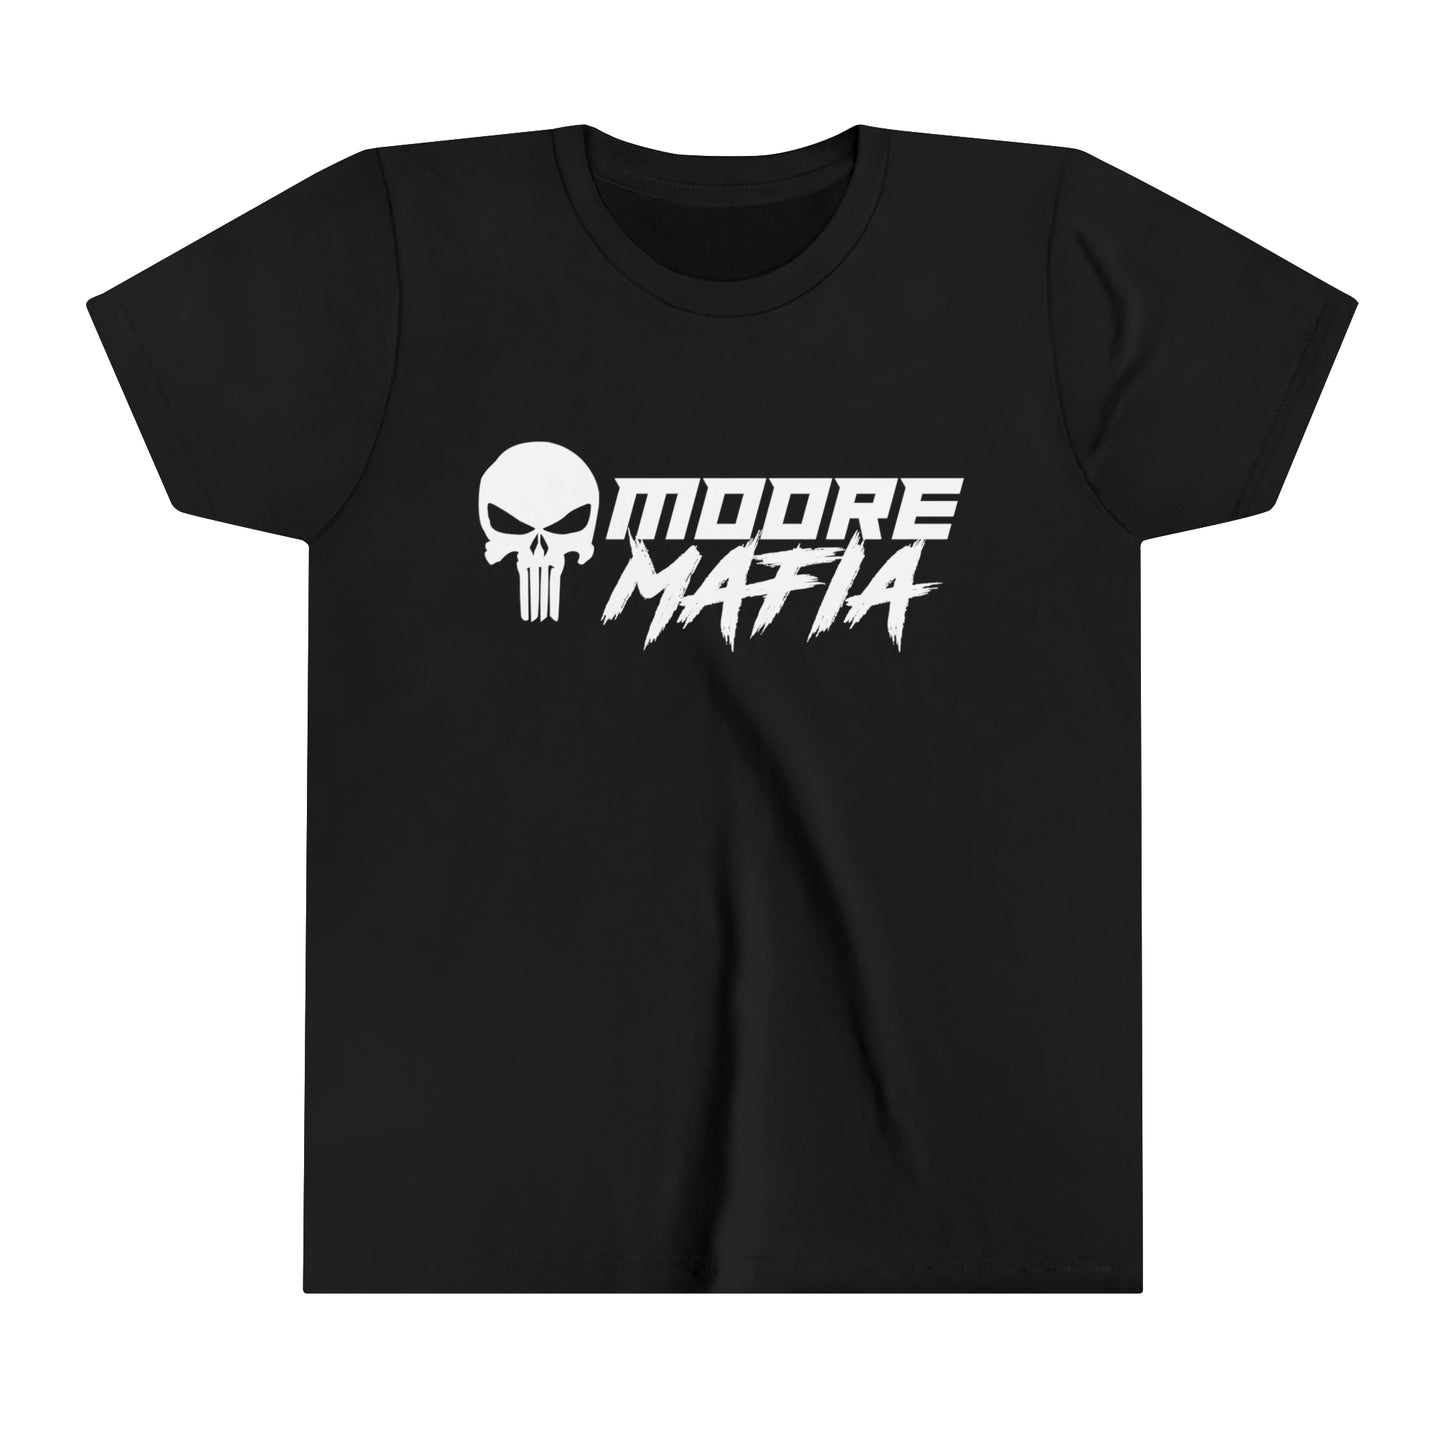 Keep It Twisted Youth Short Sleeve T-Shirt